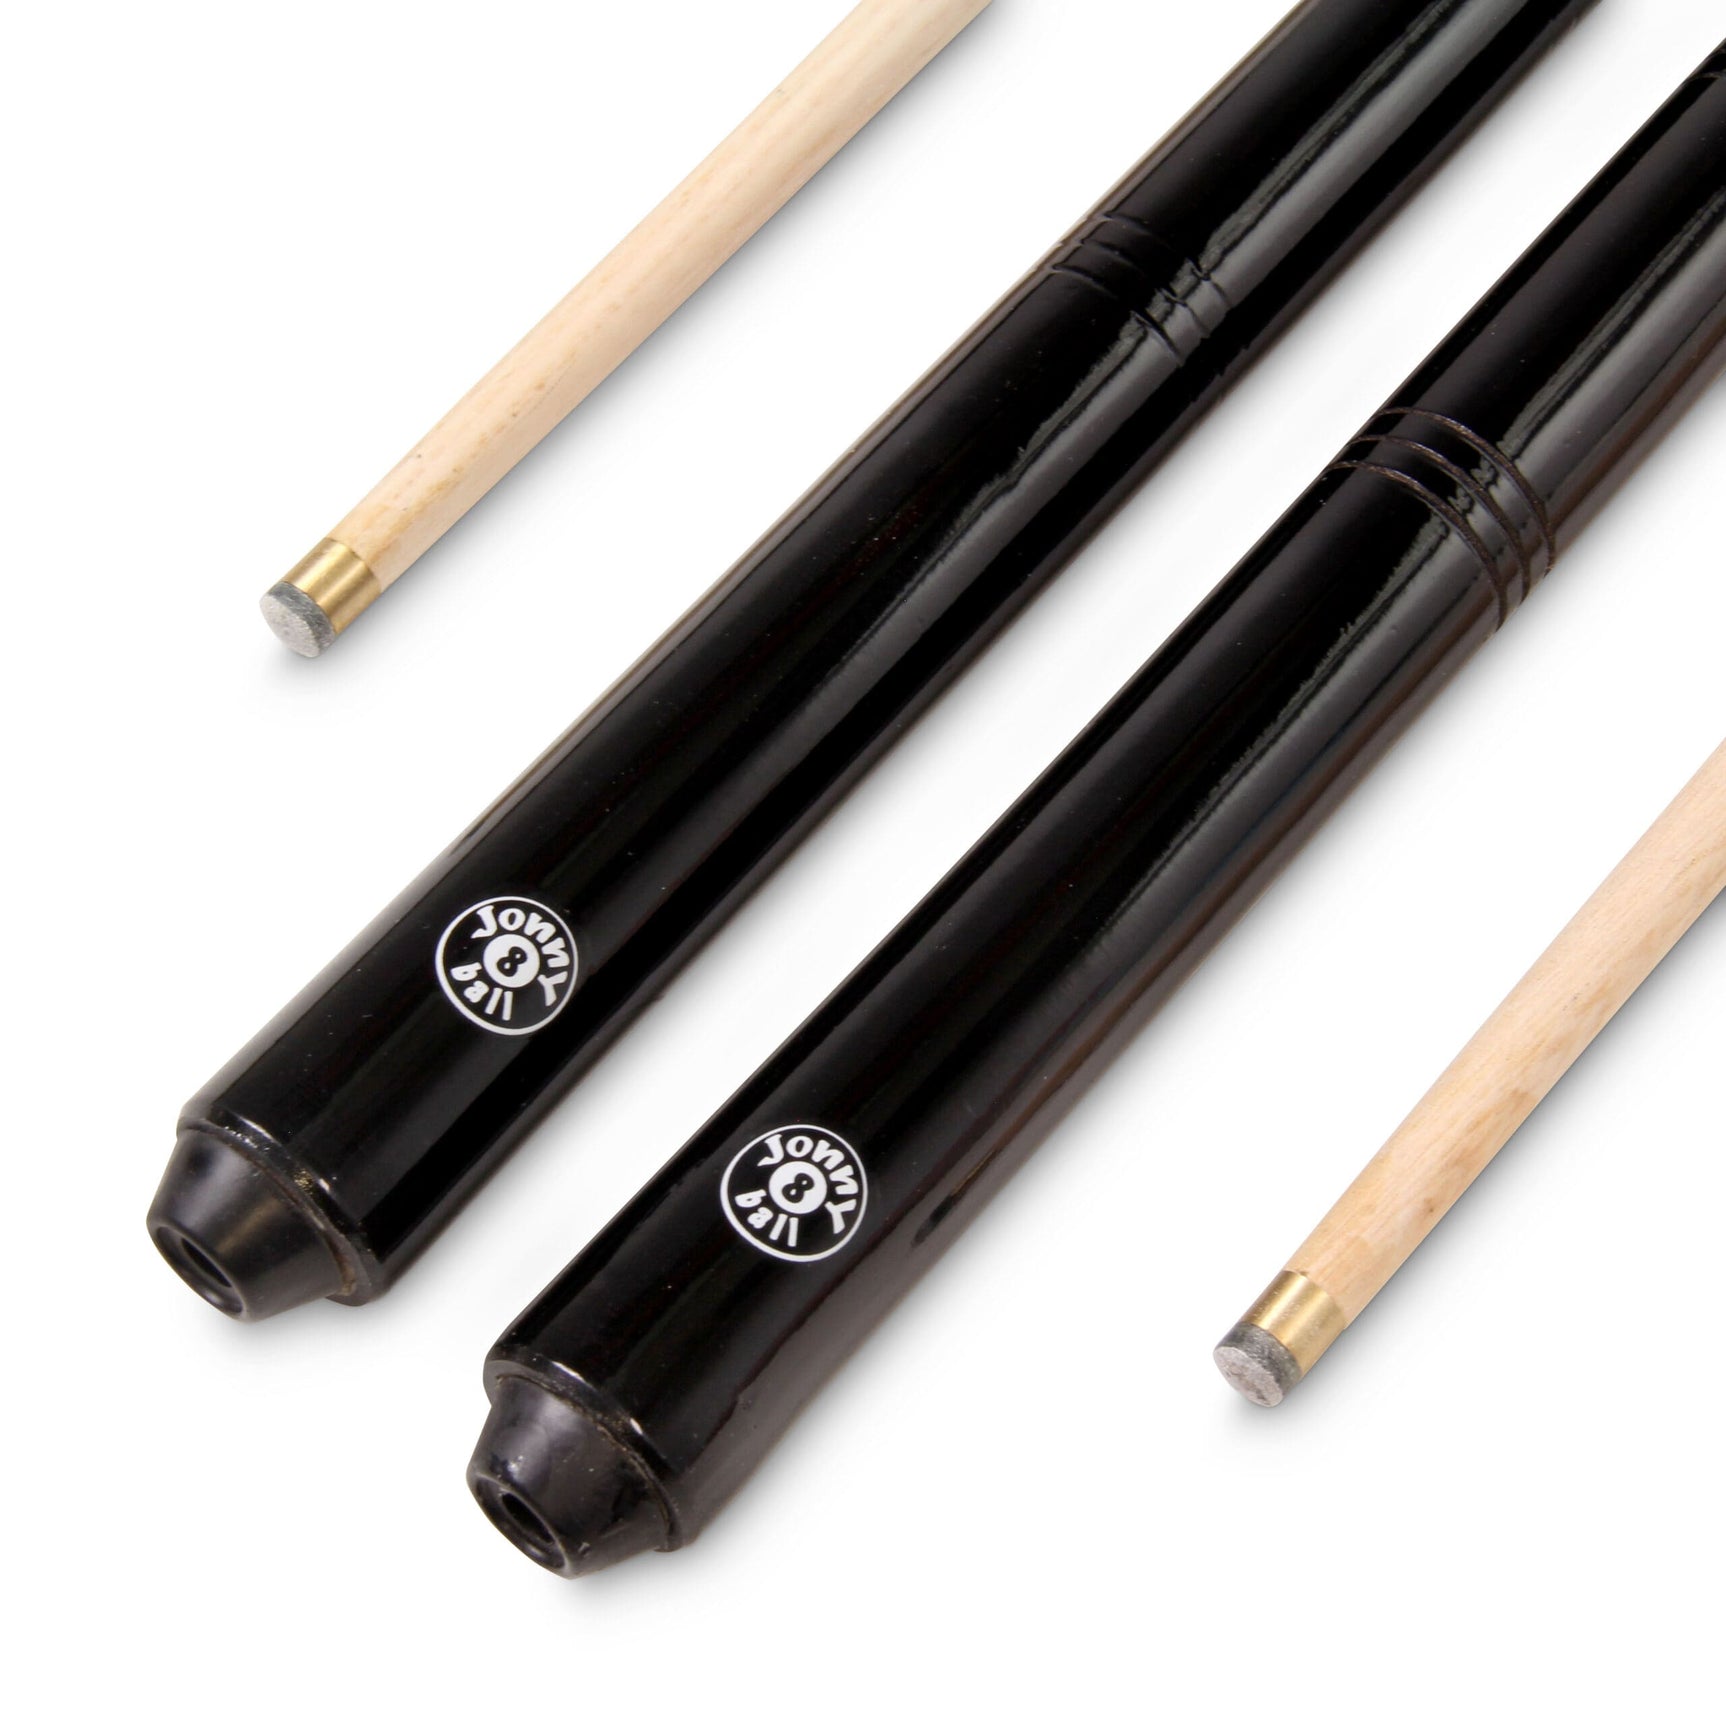 Jonny 8 Ball Pub Style 2 Piece Snooker Pool Cue Set 9.5mm Tip - TWO 57 Inch Cues